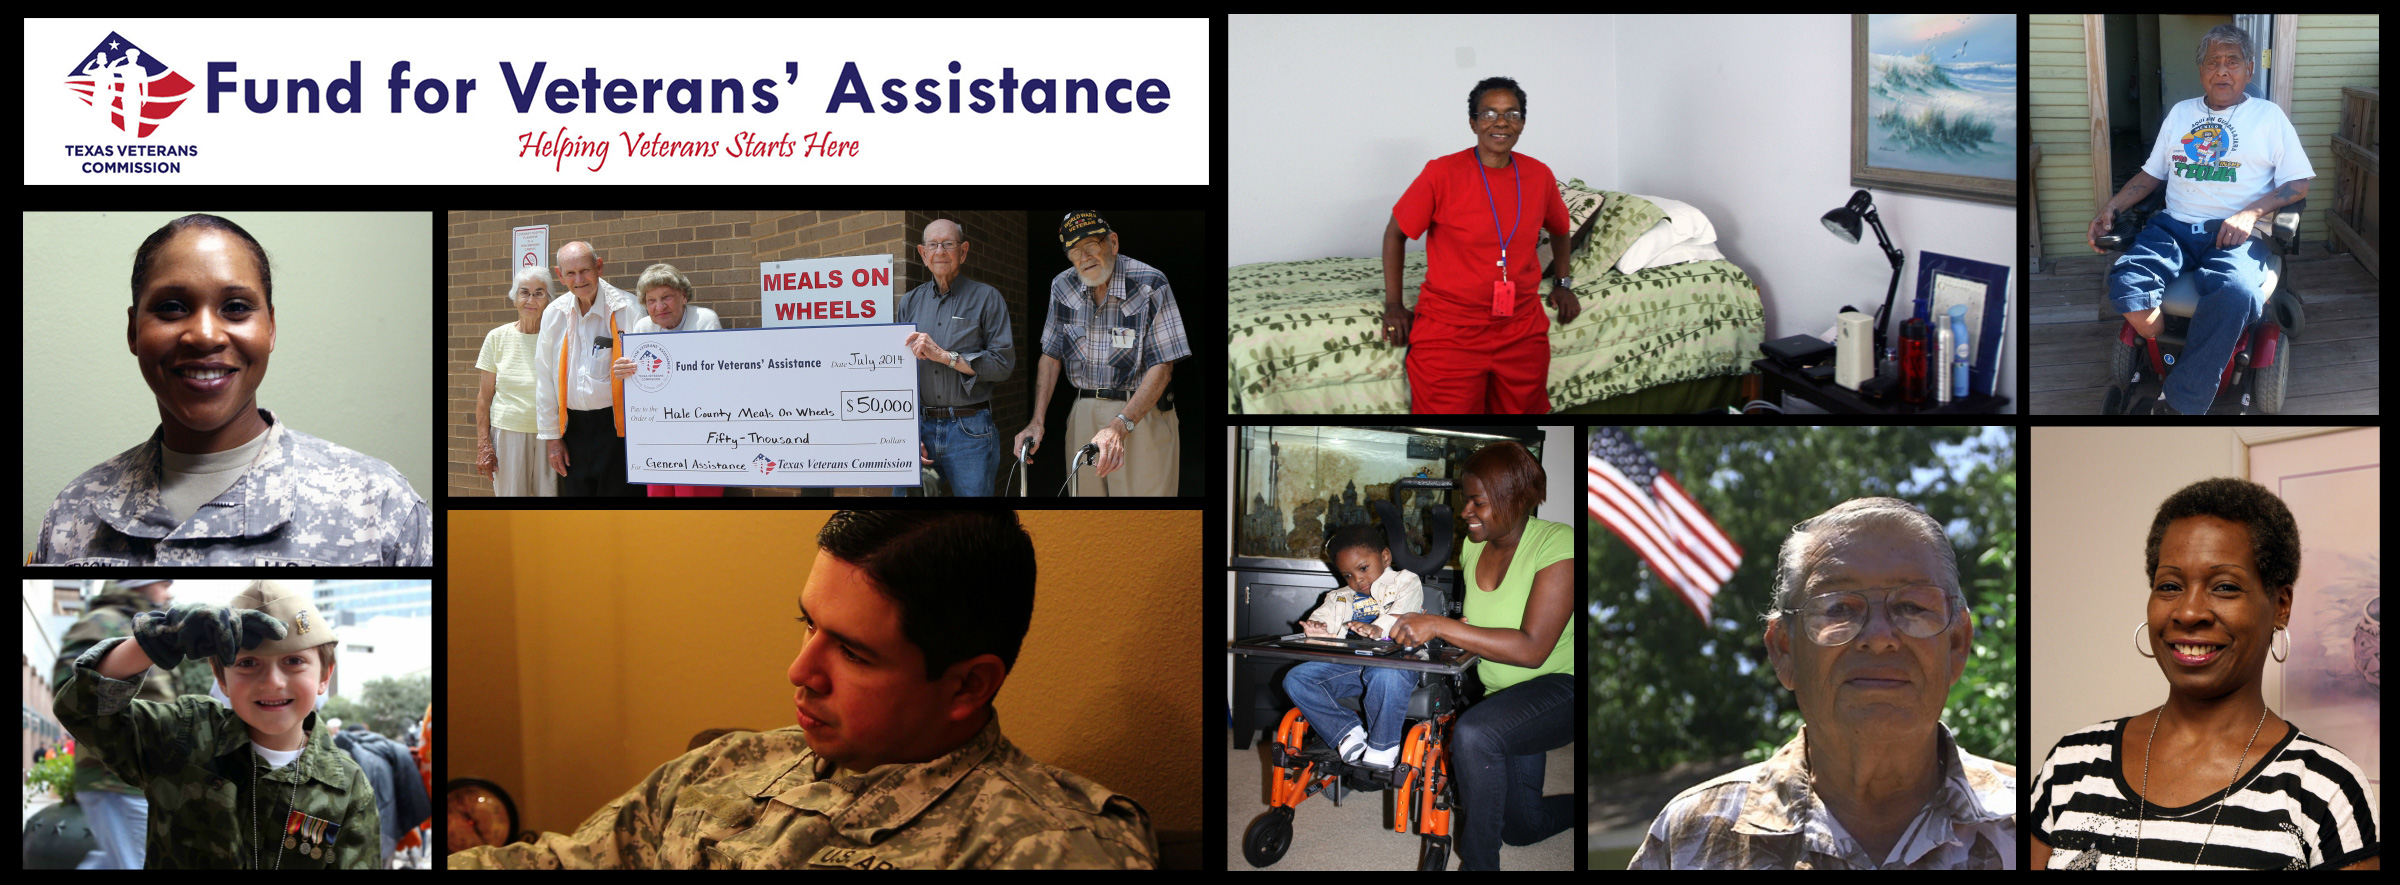 Texas Fund for Veterans Assistance Placard